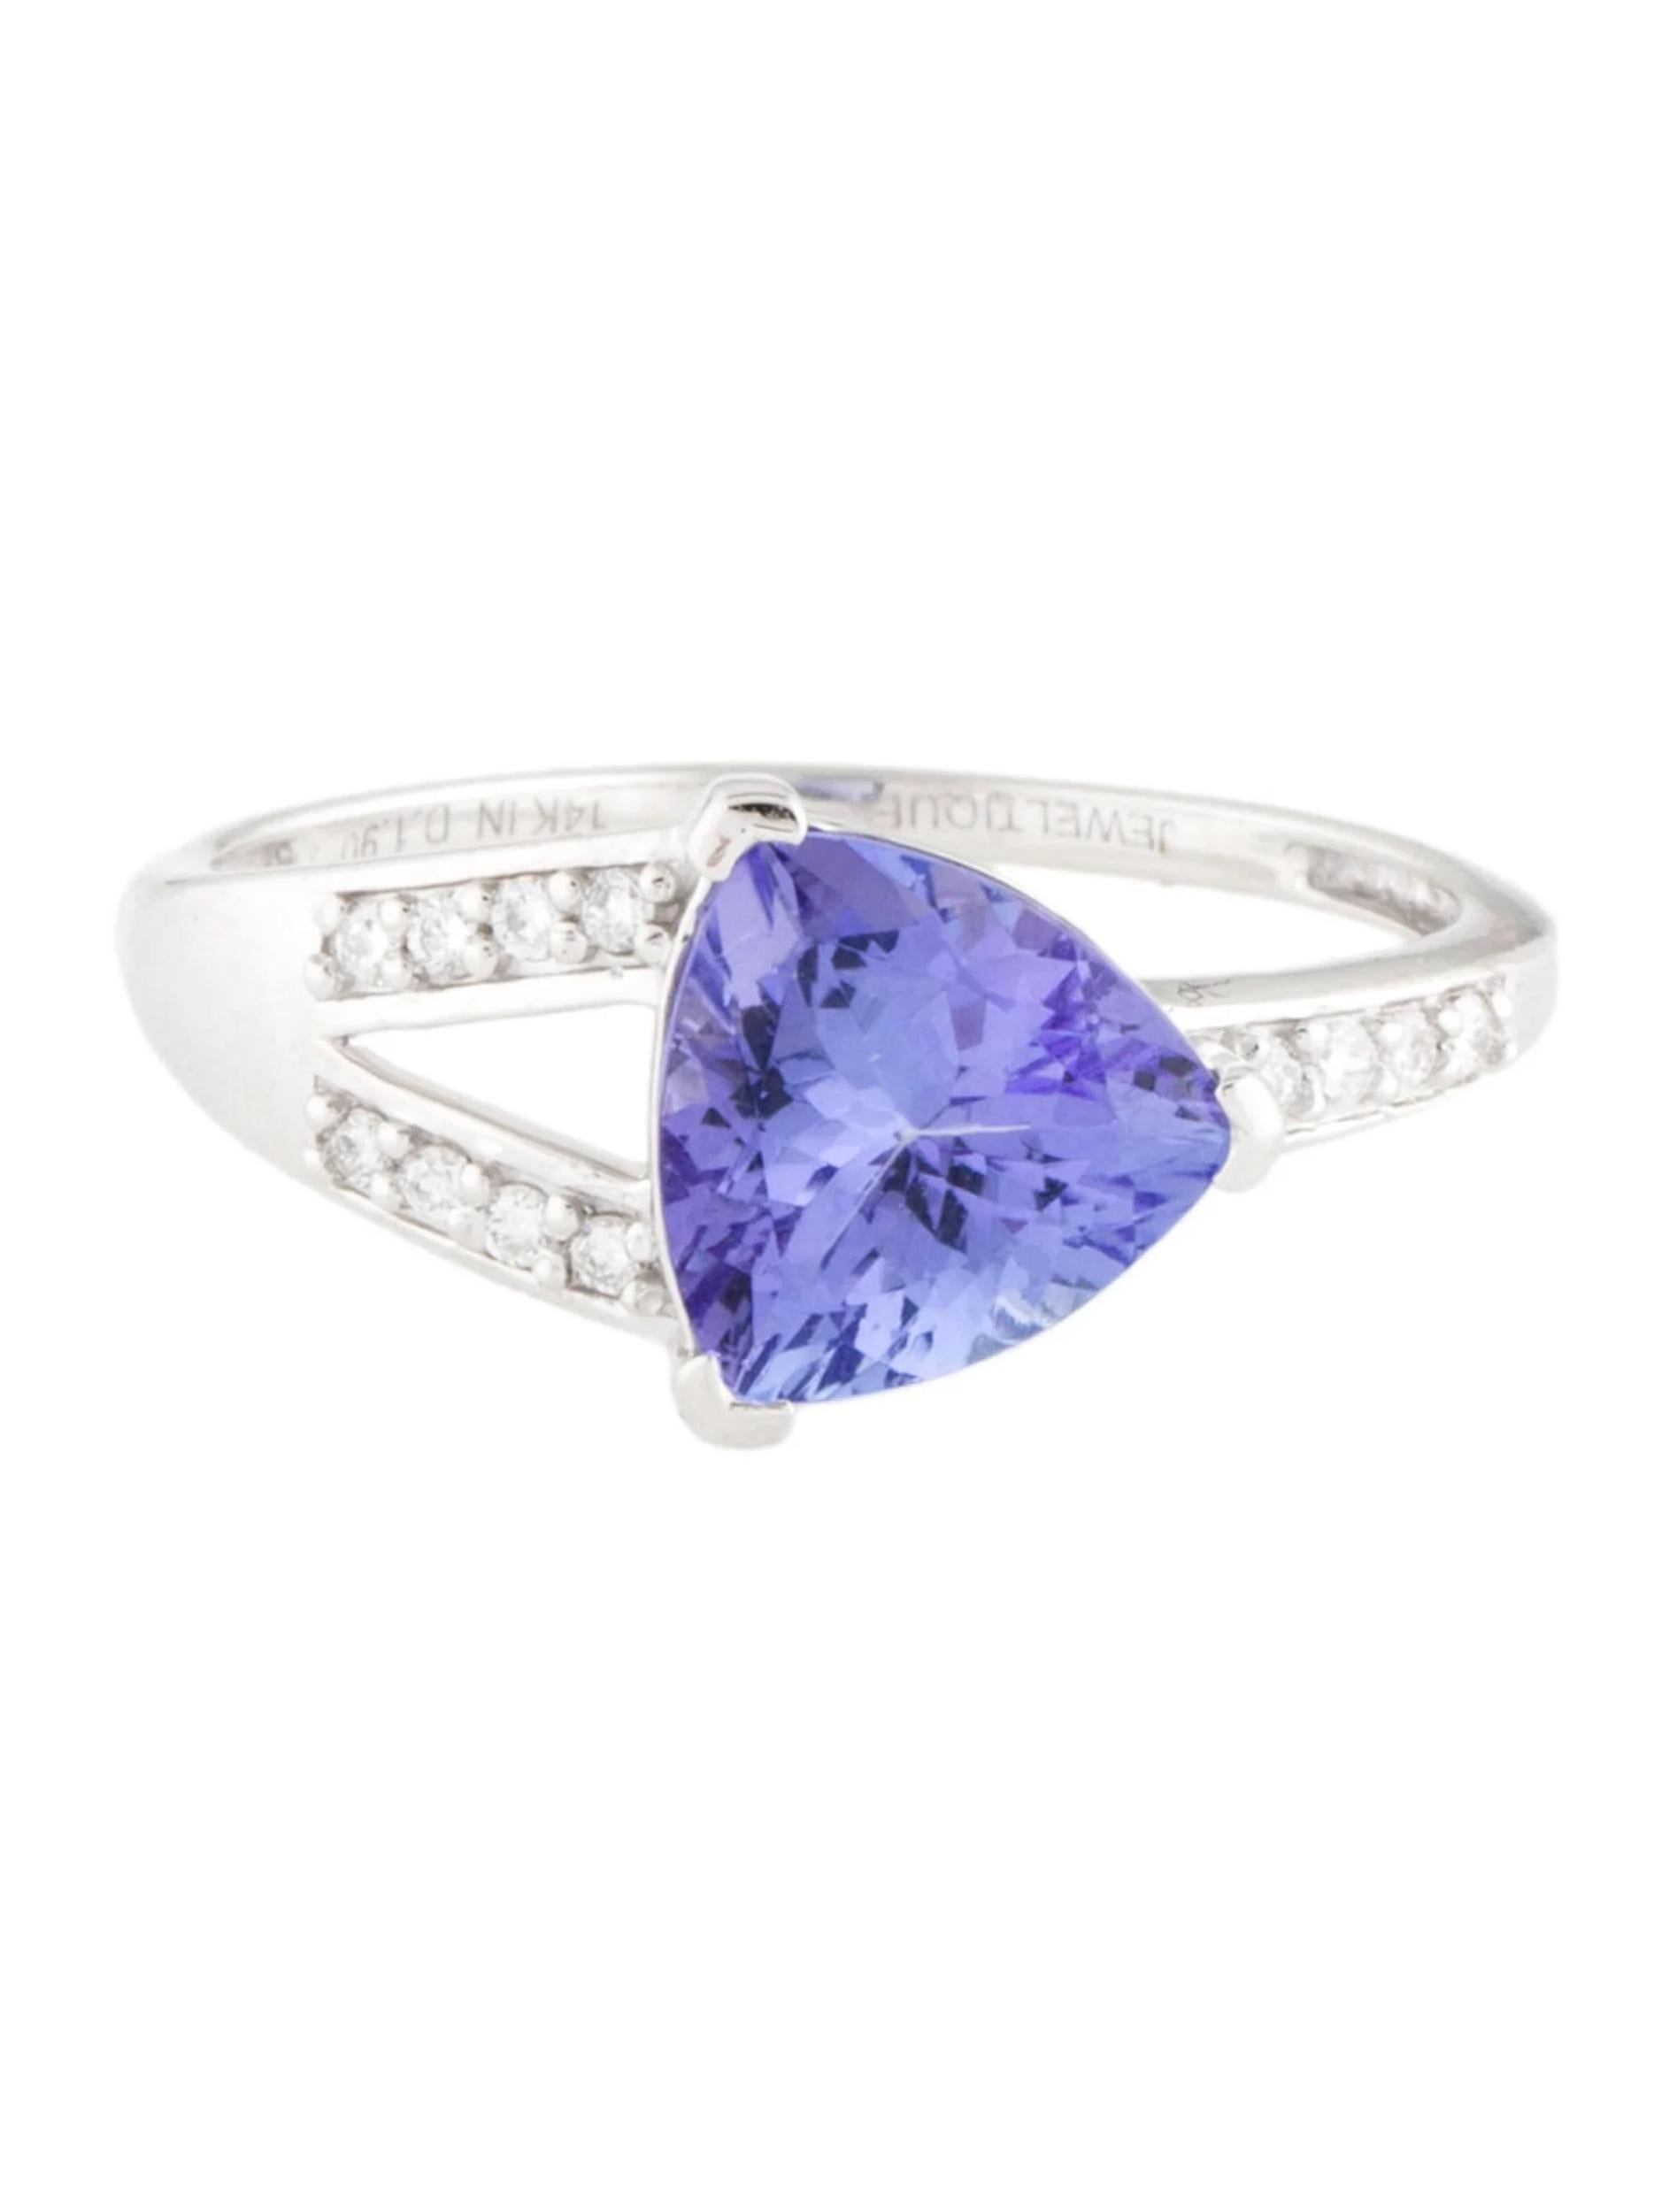 This exquisite 14K white gold cocktail ring is a true statement piece that will captivate any admirer. The centerpiece features a dazzling tanzanite gemstone, weighing 1.91 carats, in a unique modified triangular brilliant cut. Its mesmerizing